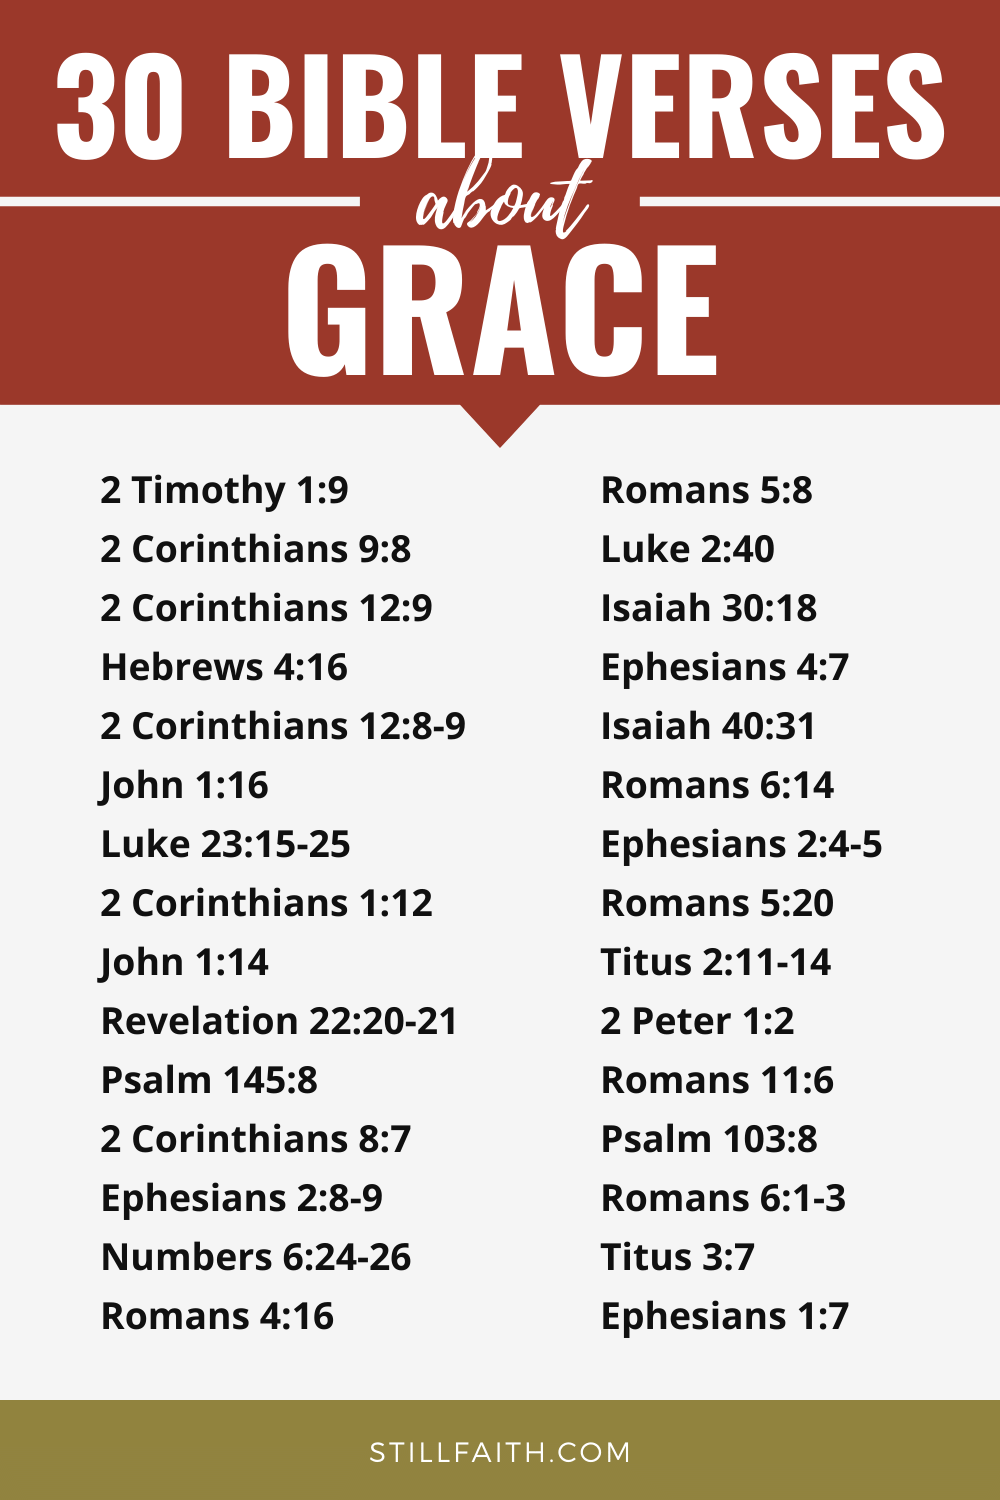 What Does the Bible Say about Grace?